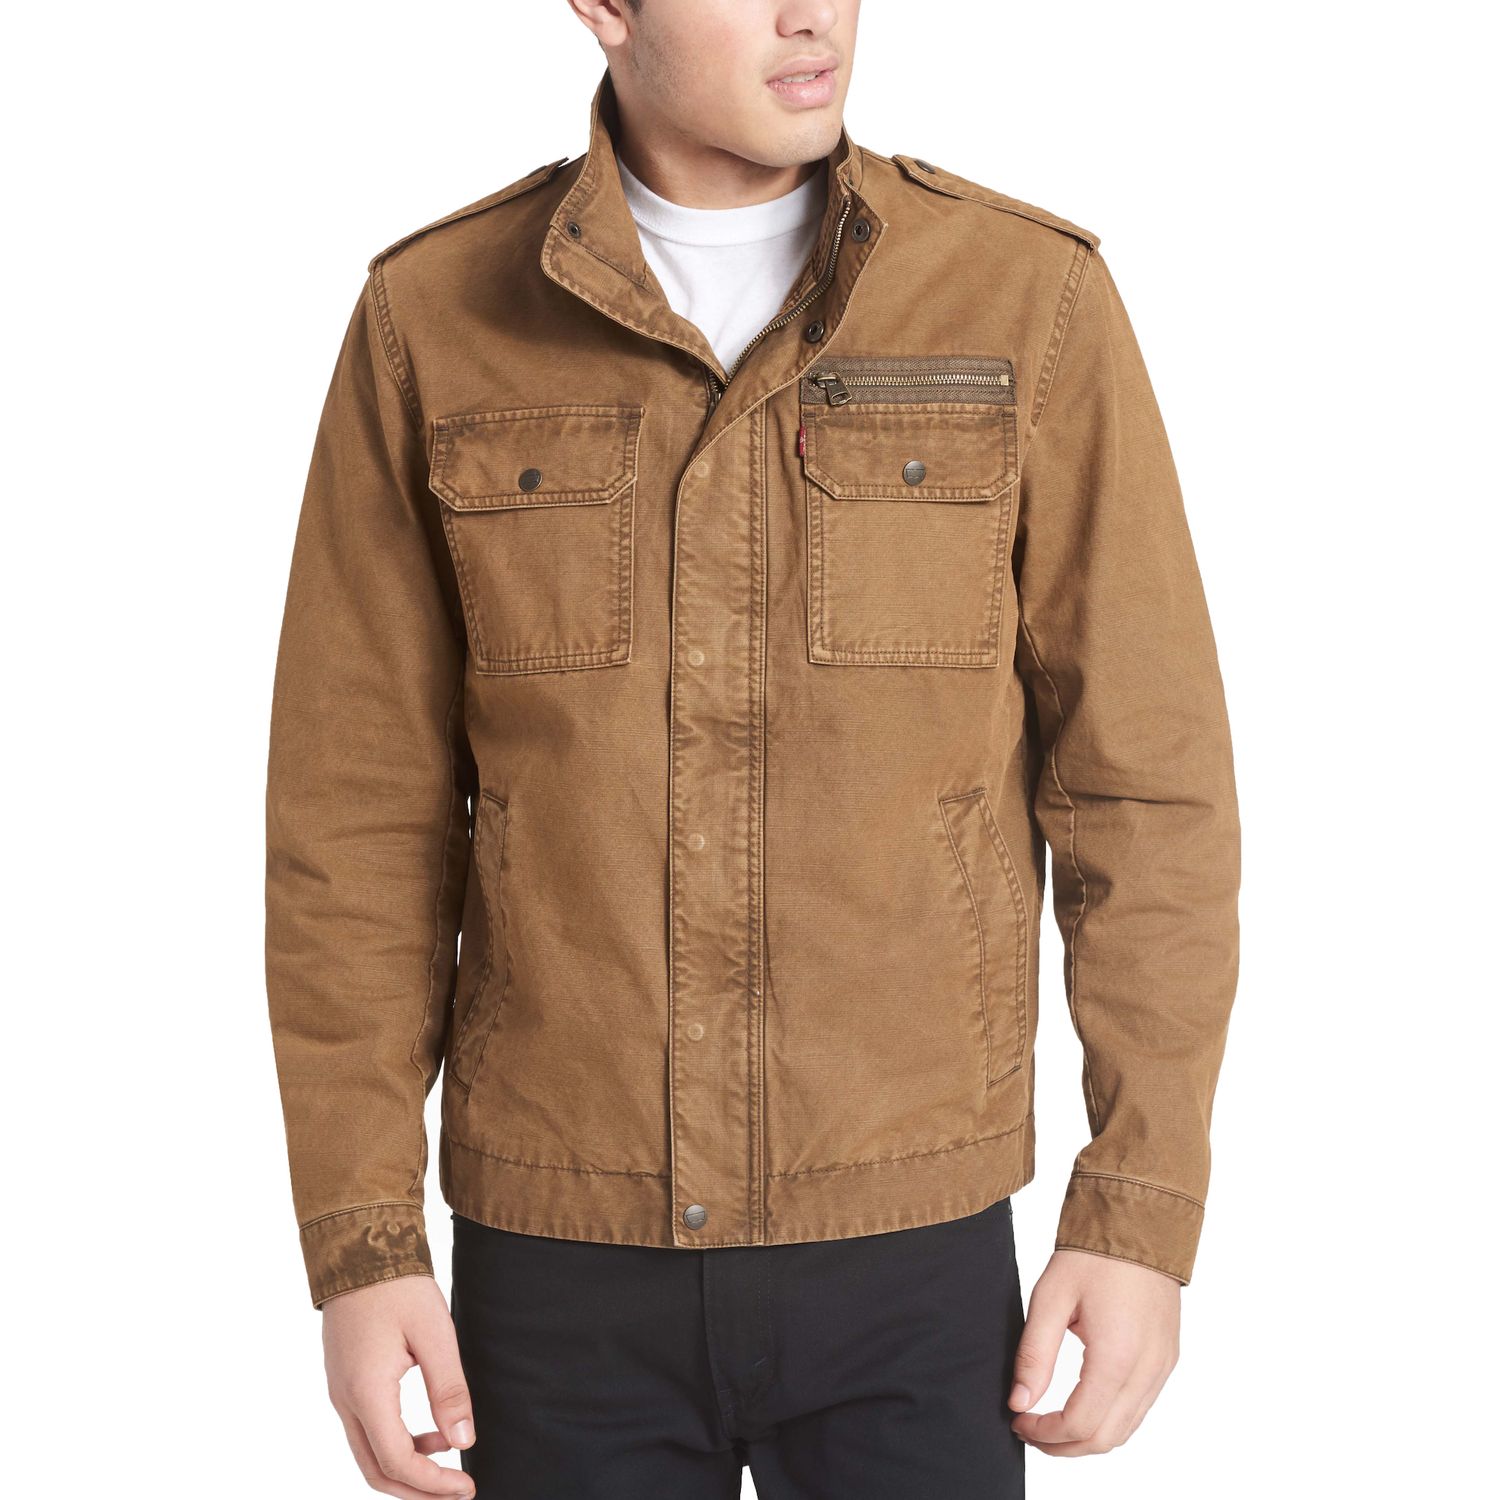 levi's sherpa lined military jacket